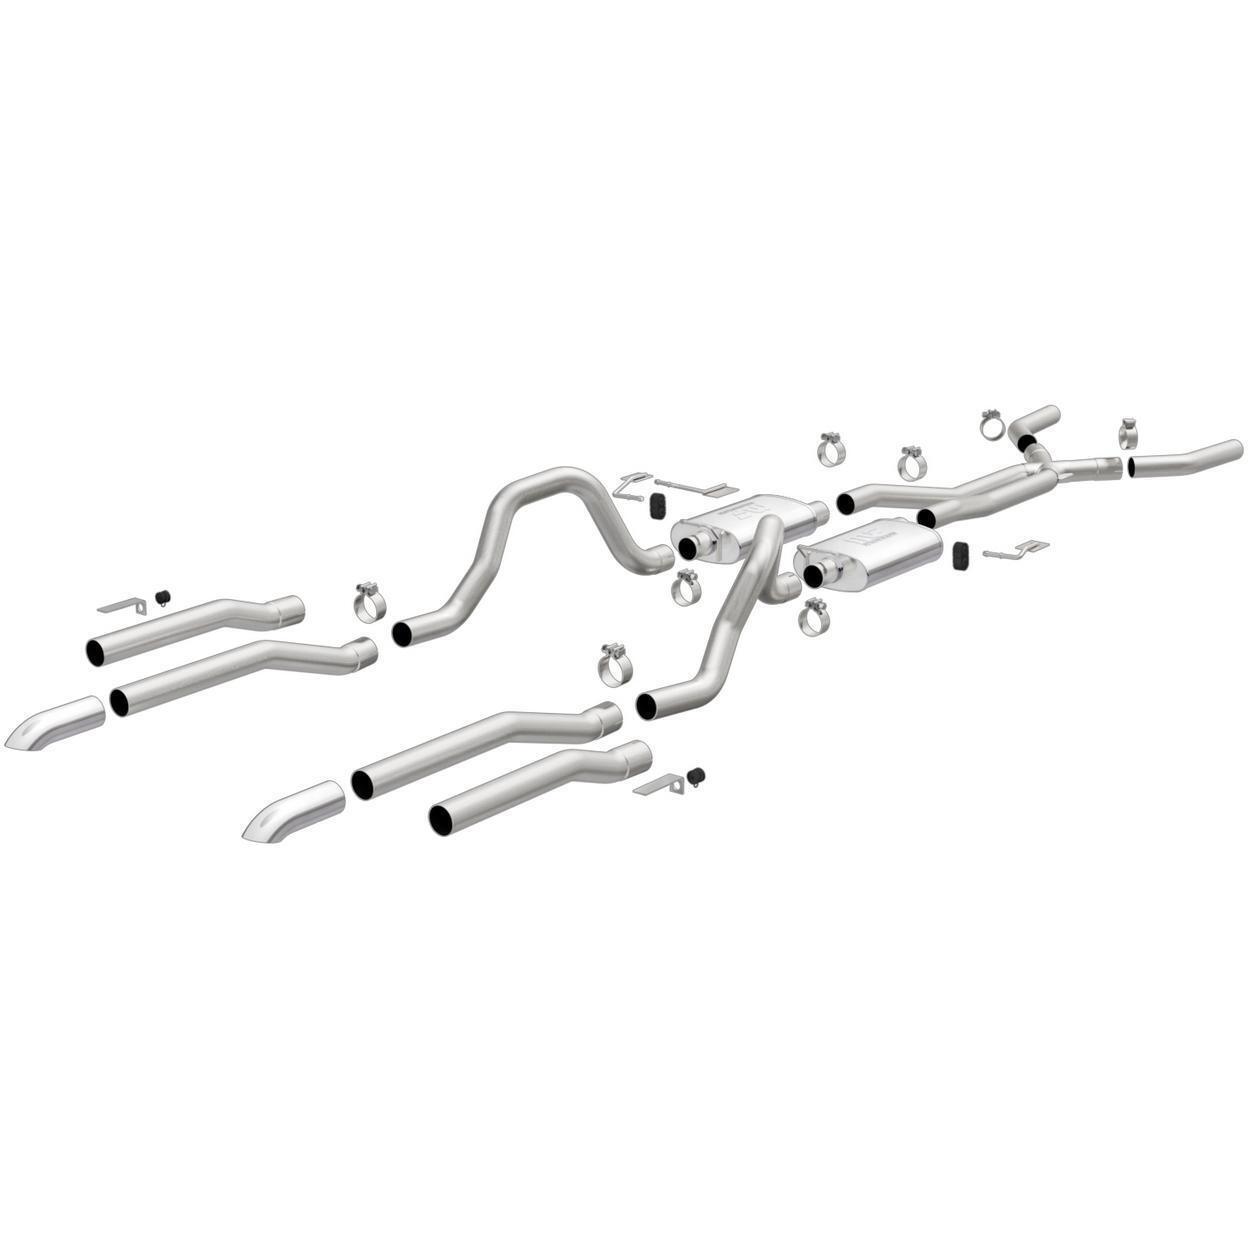 Exhaust System Kit for 1965-1968 Plymouth Satellite